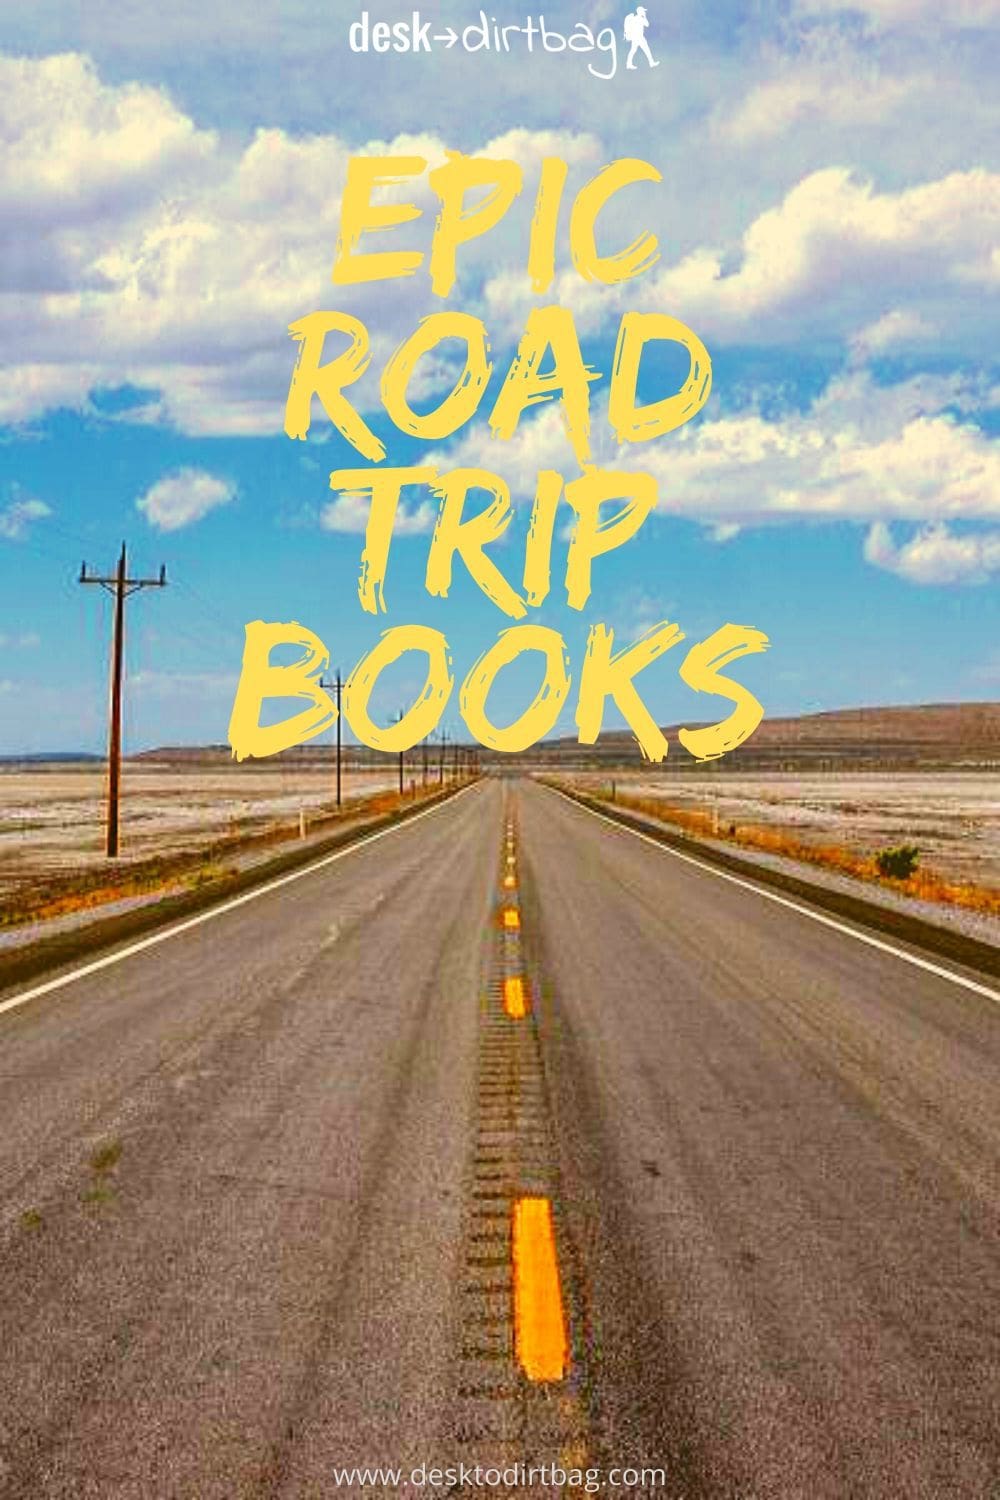 best books on tape for road trips